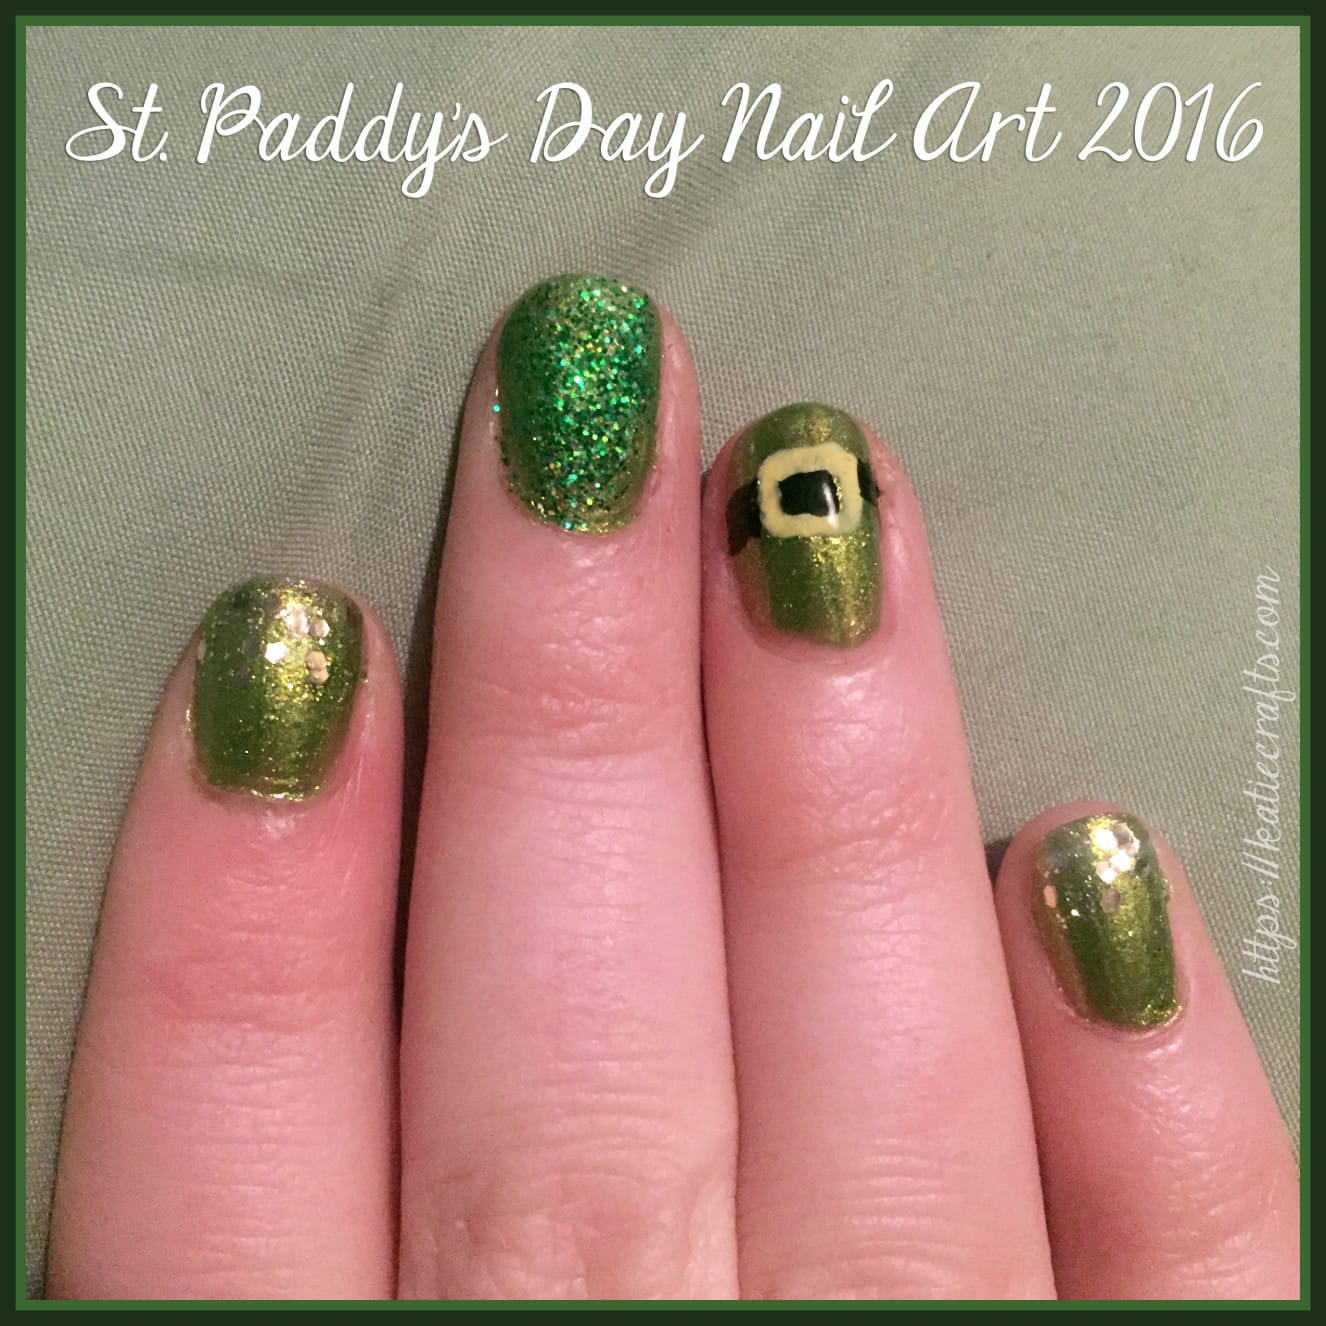 St. Paddy's Day Nail Art 2016 by Katie Crafts; https://www.katiecrafts.com